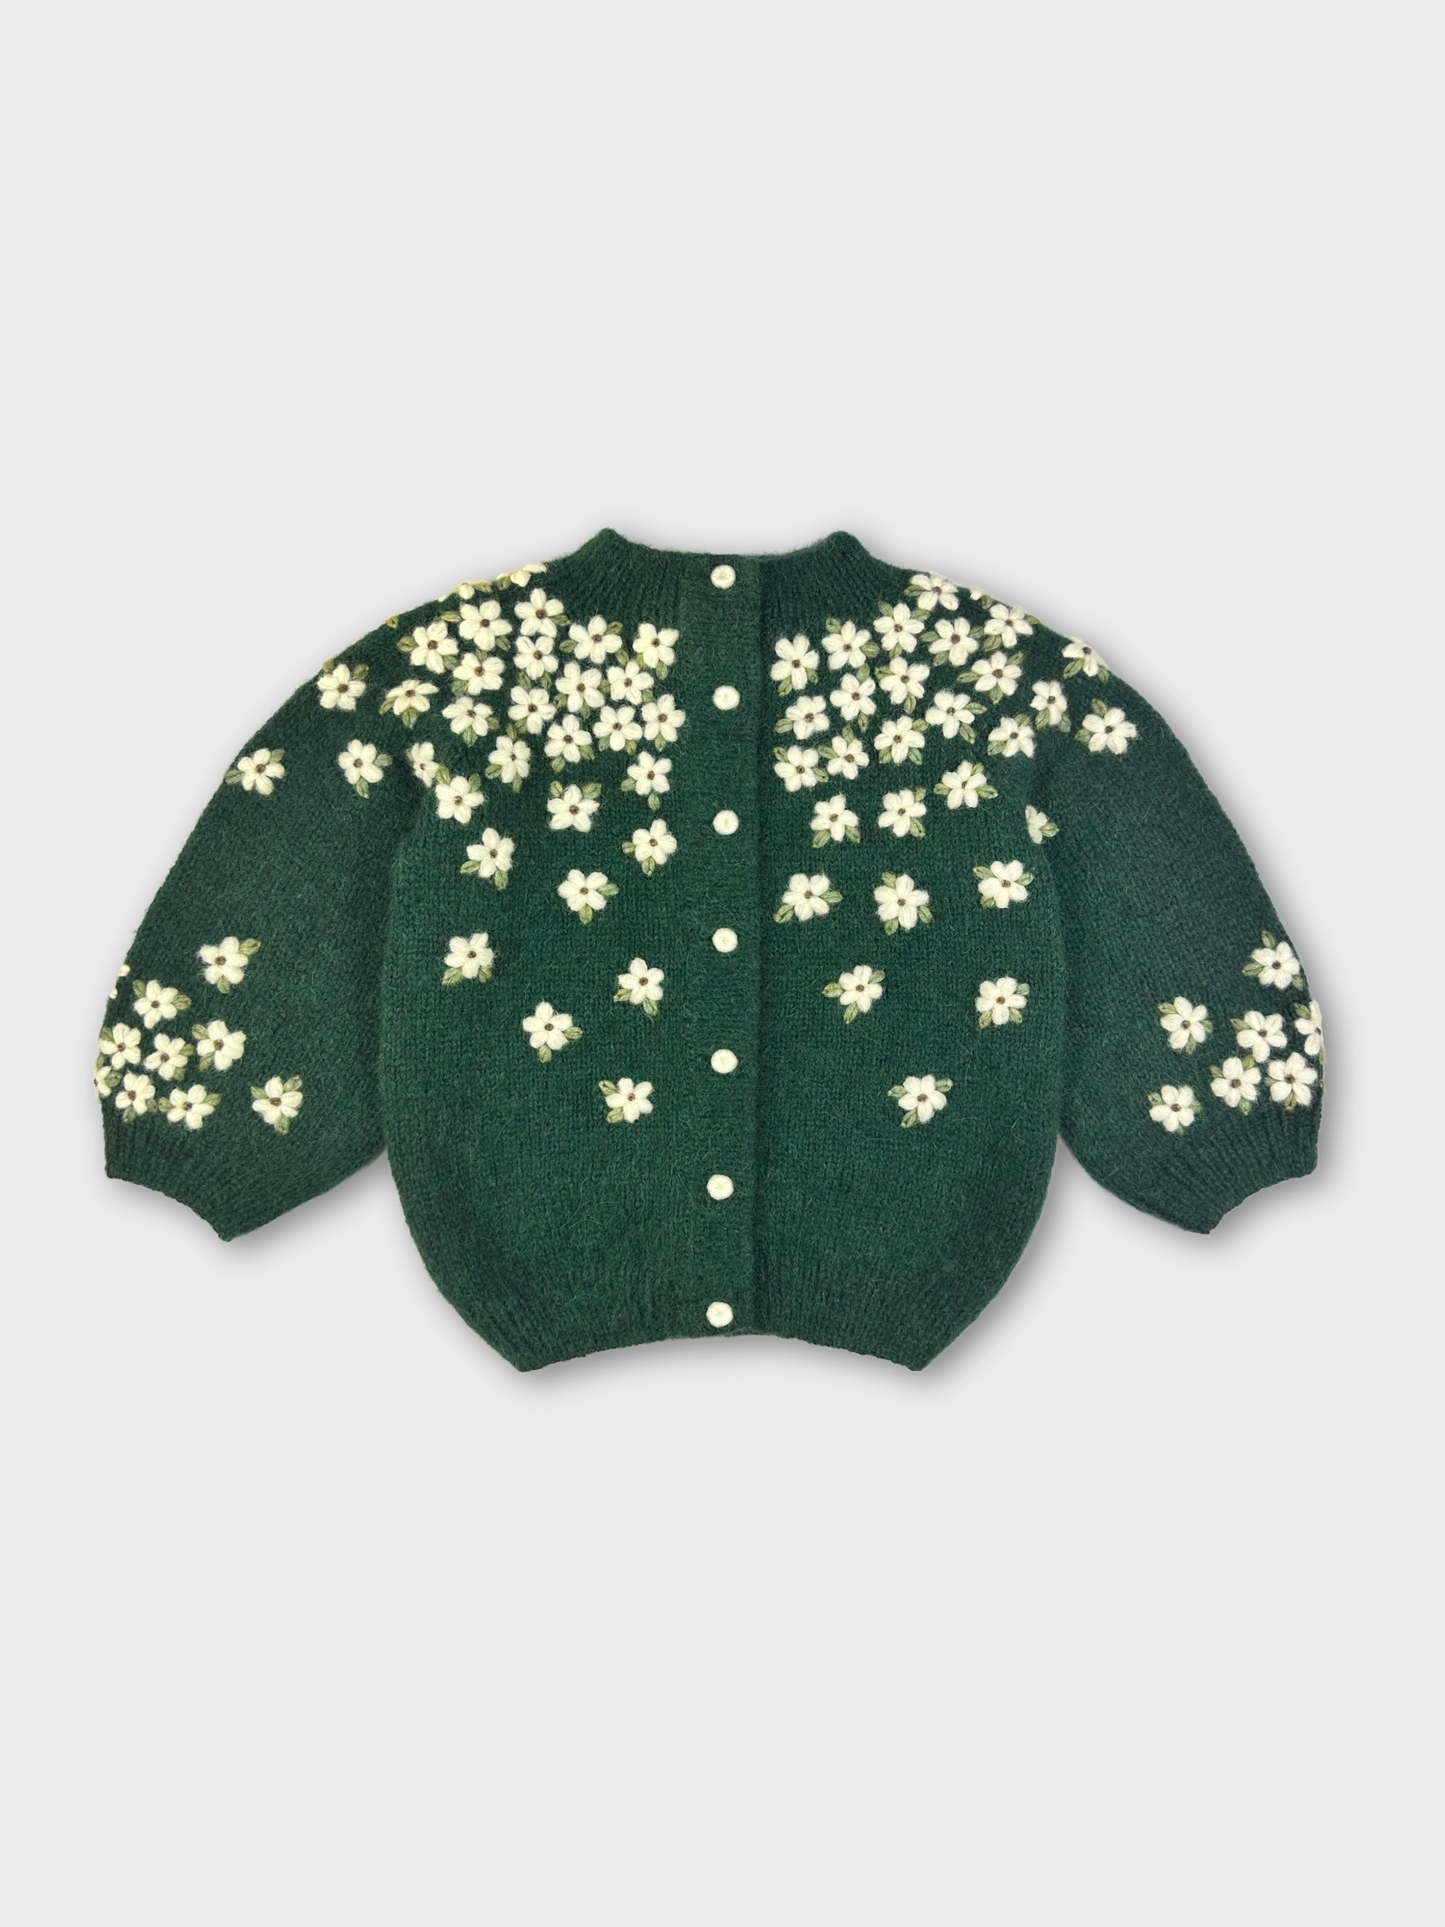 Forest Daisies Hand Knit Cardigan